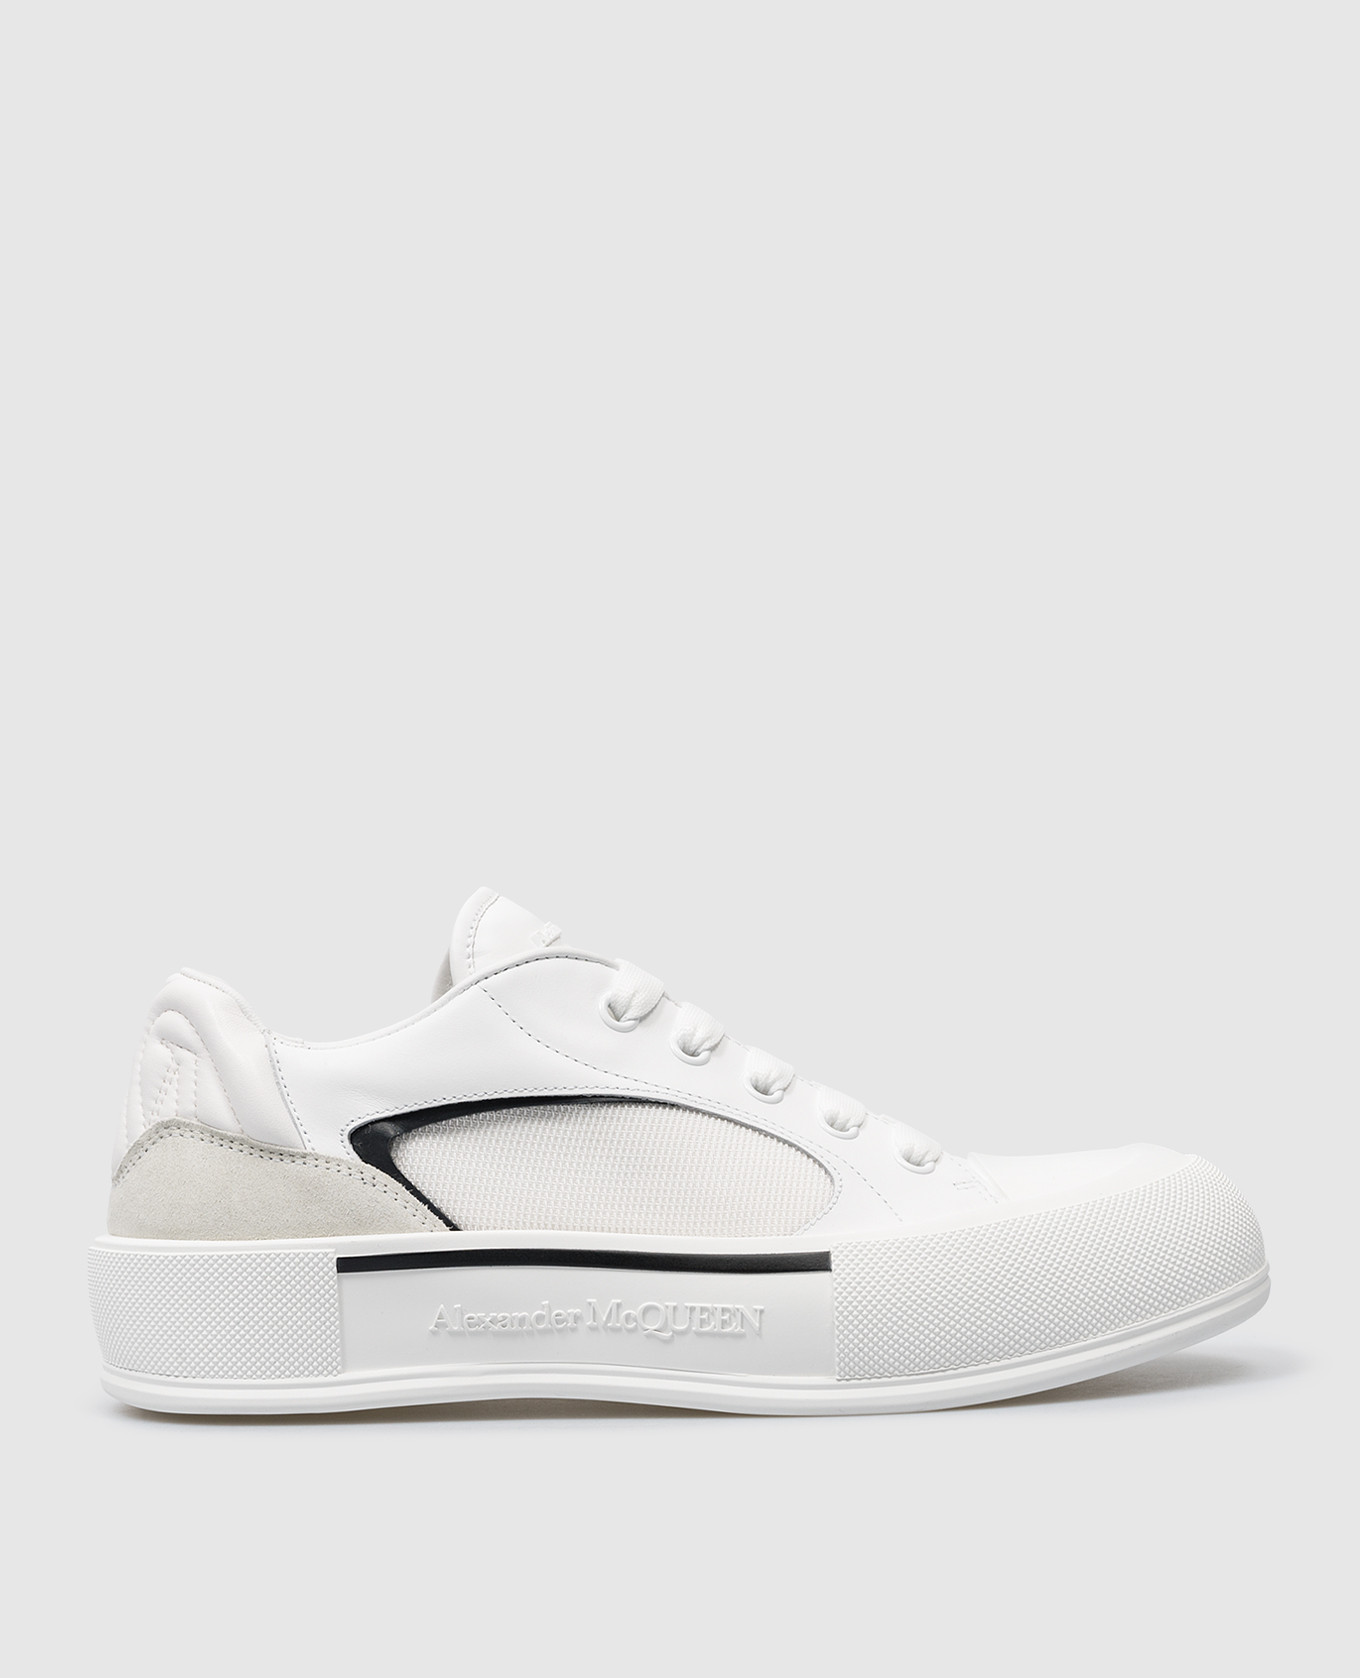 Skate Deck white leather trainers with textured logo